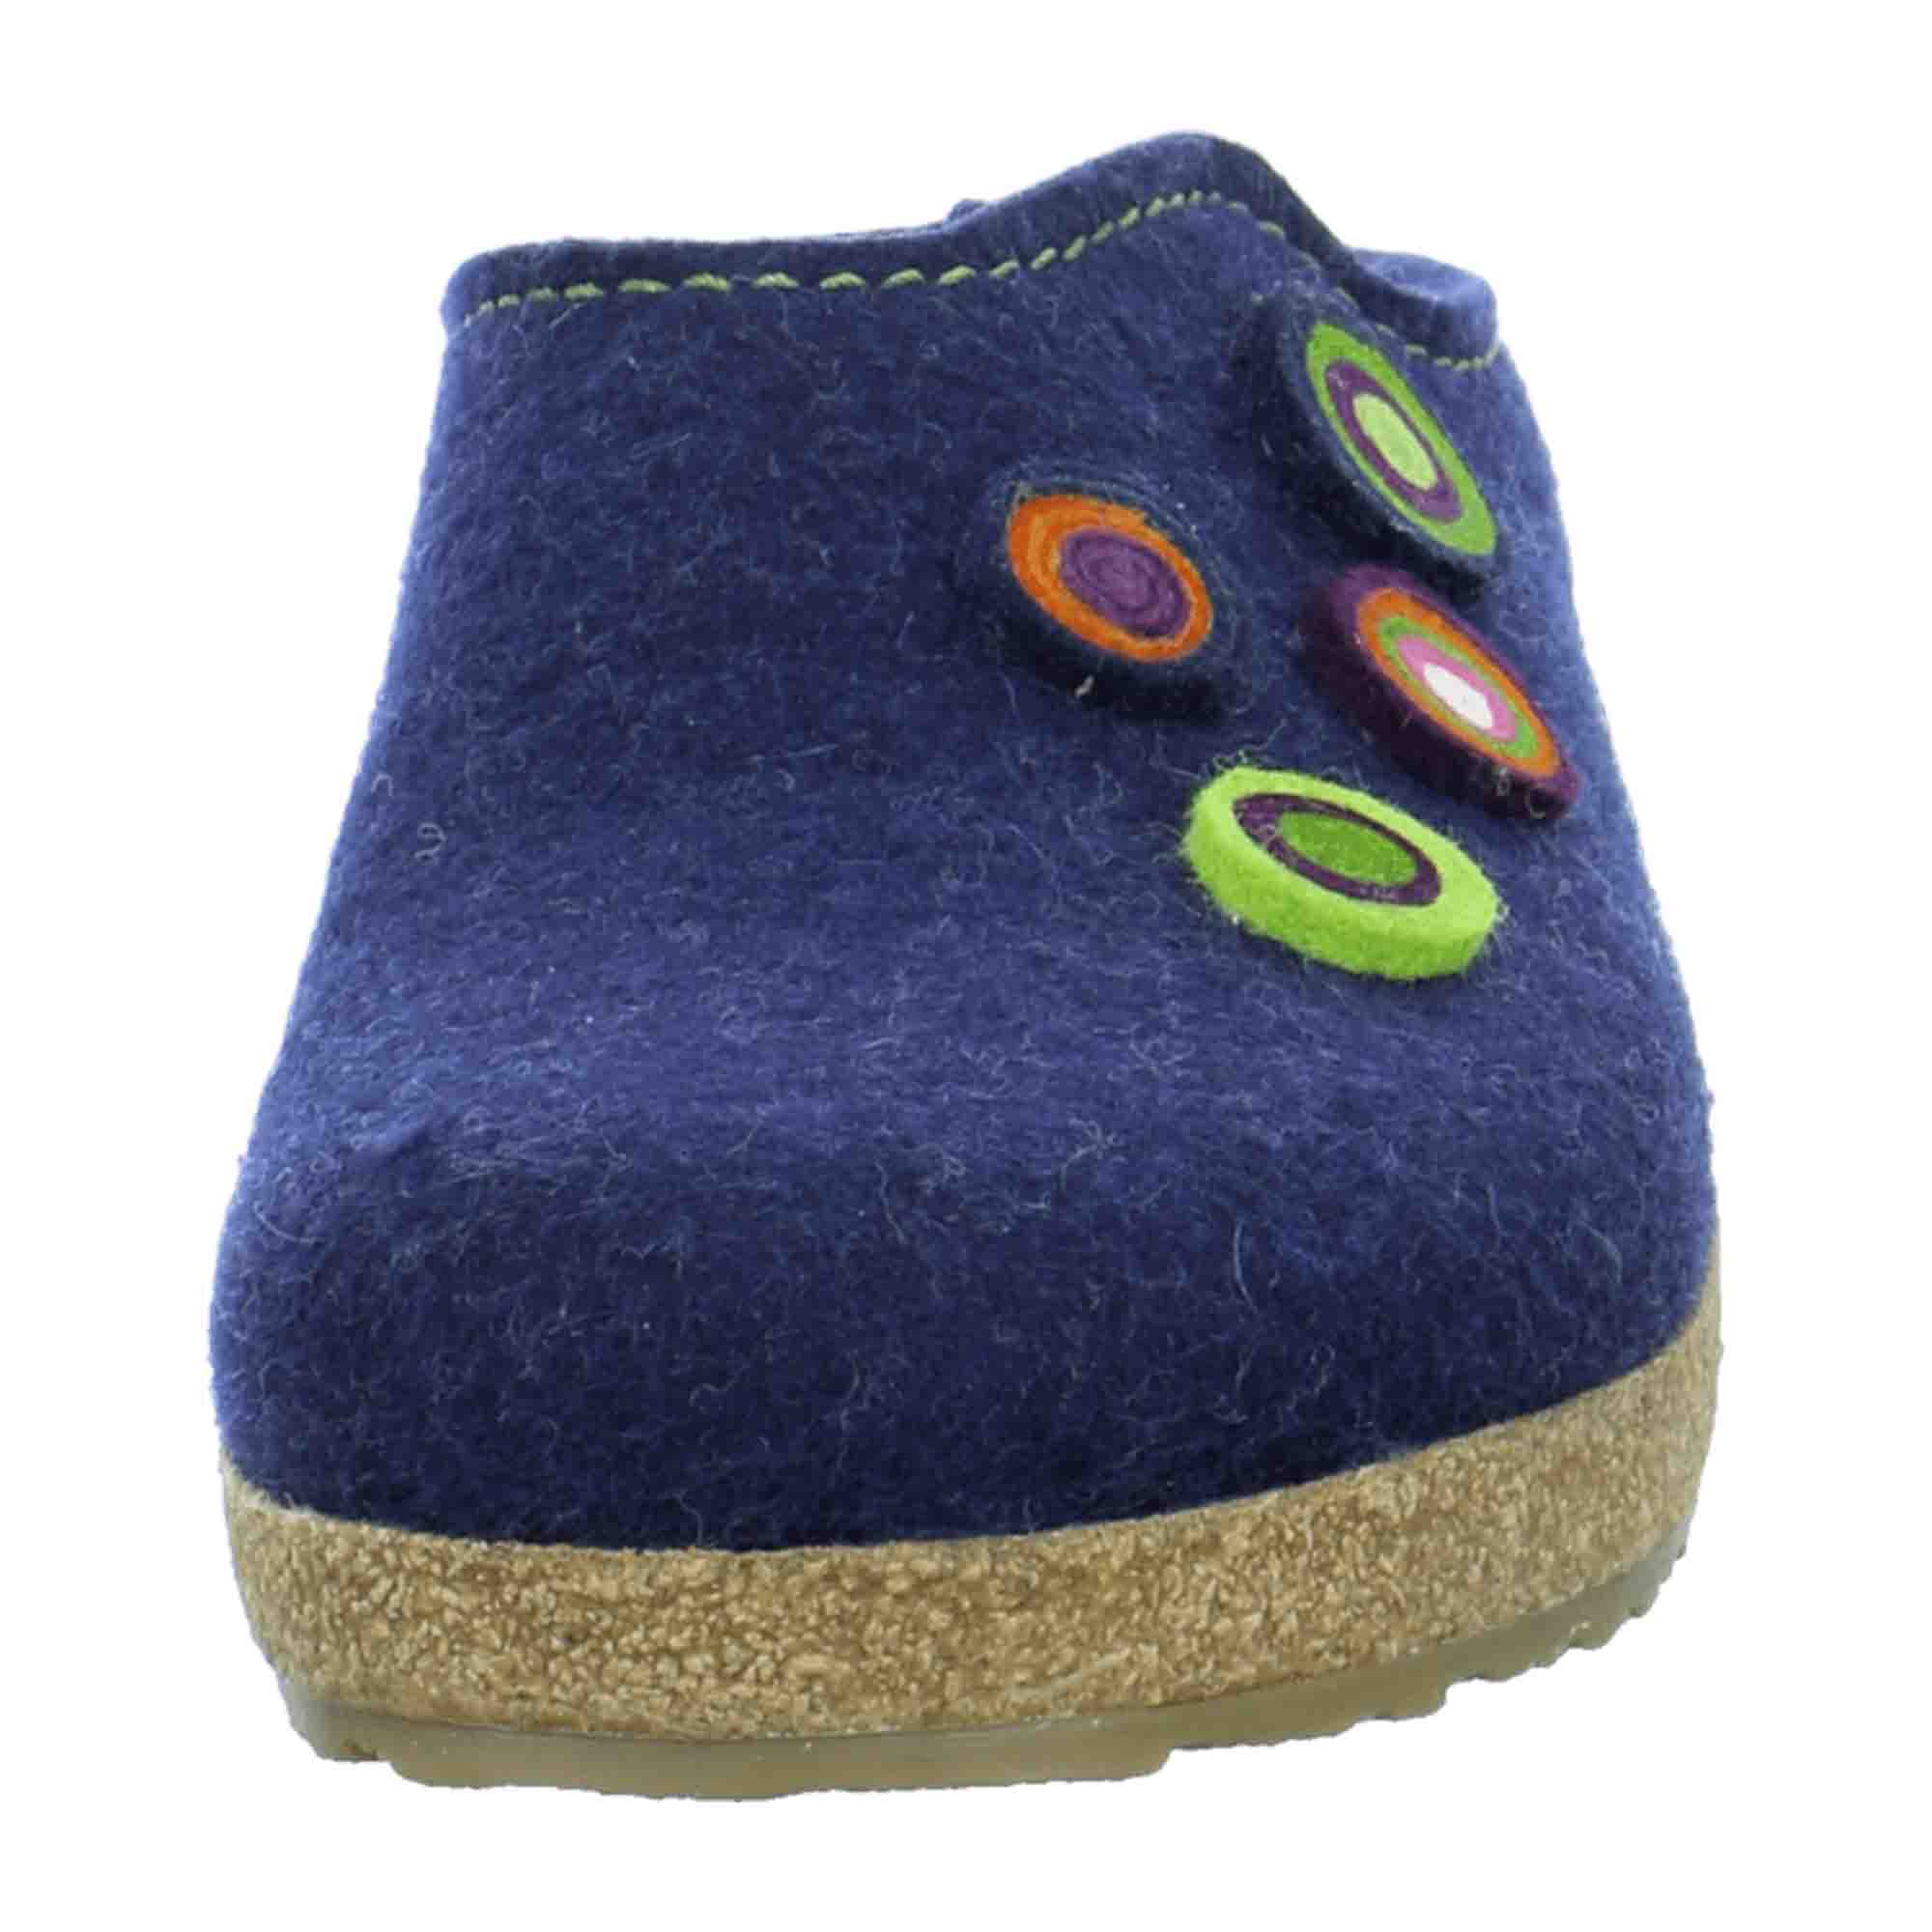 Haflinger Grizzly Kanon Women's Blue Wool Clogs - Comfortable and Durable